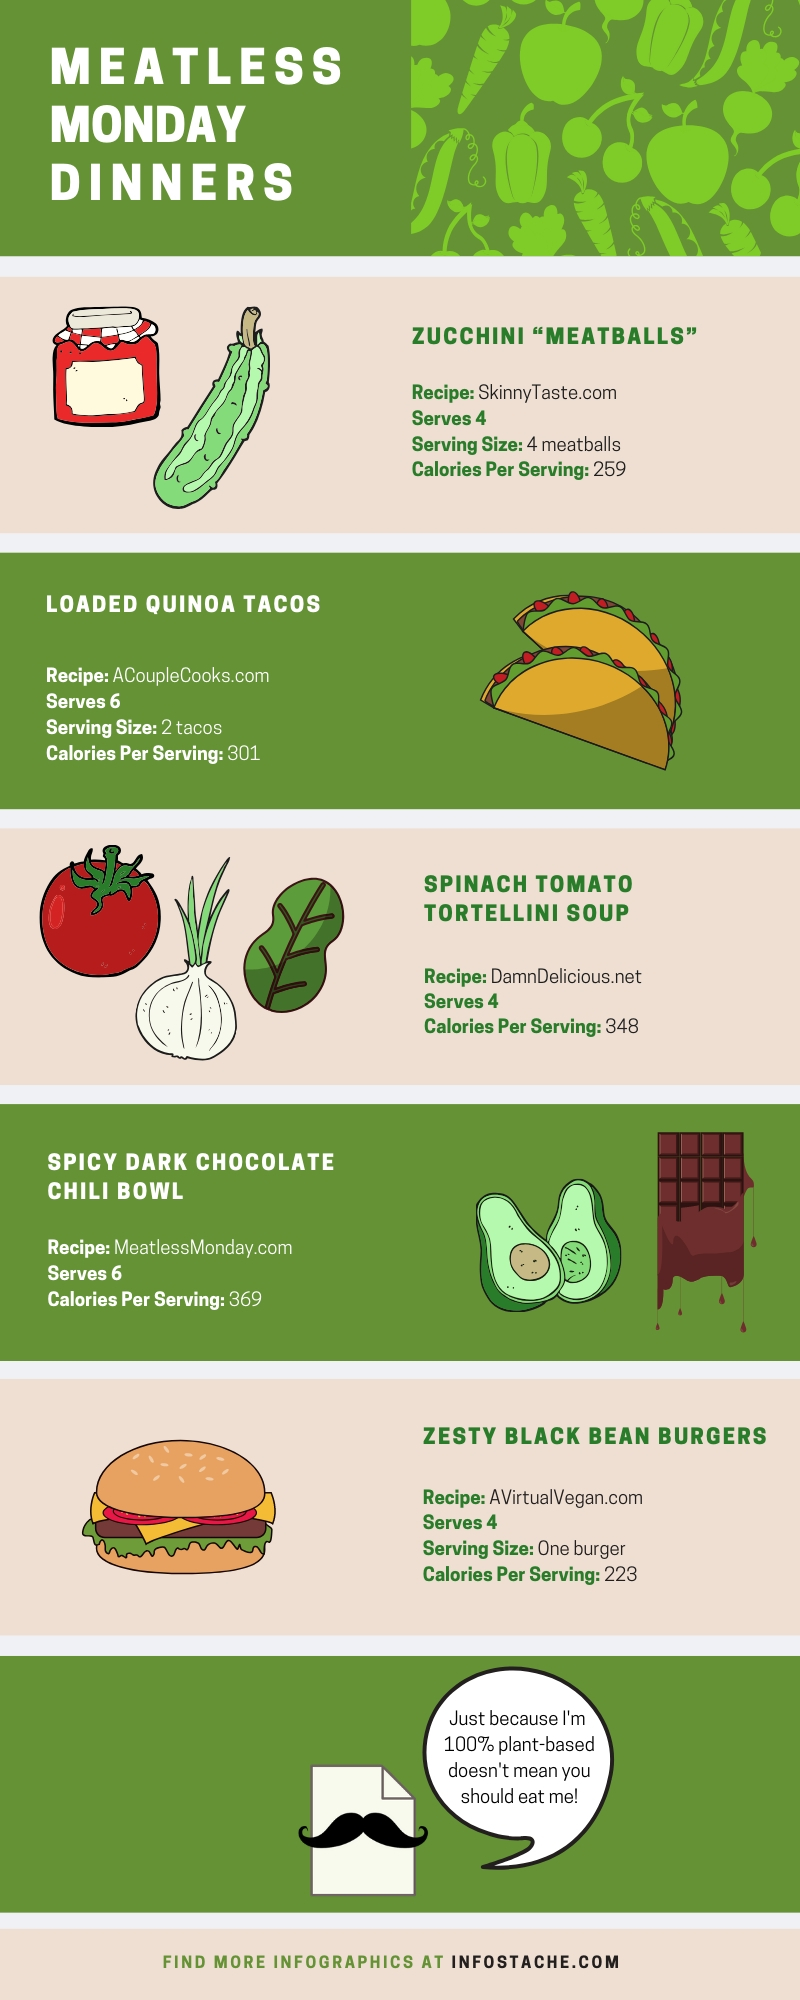 Meatless Monday Dinners - Infographic